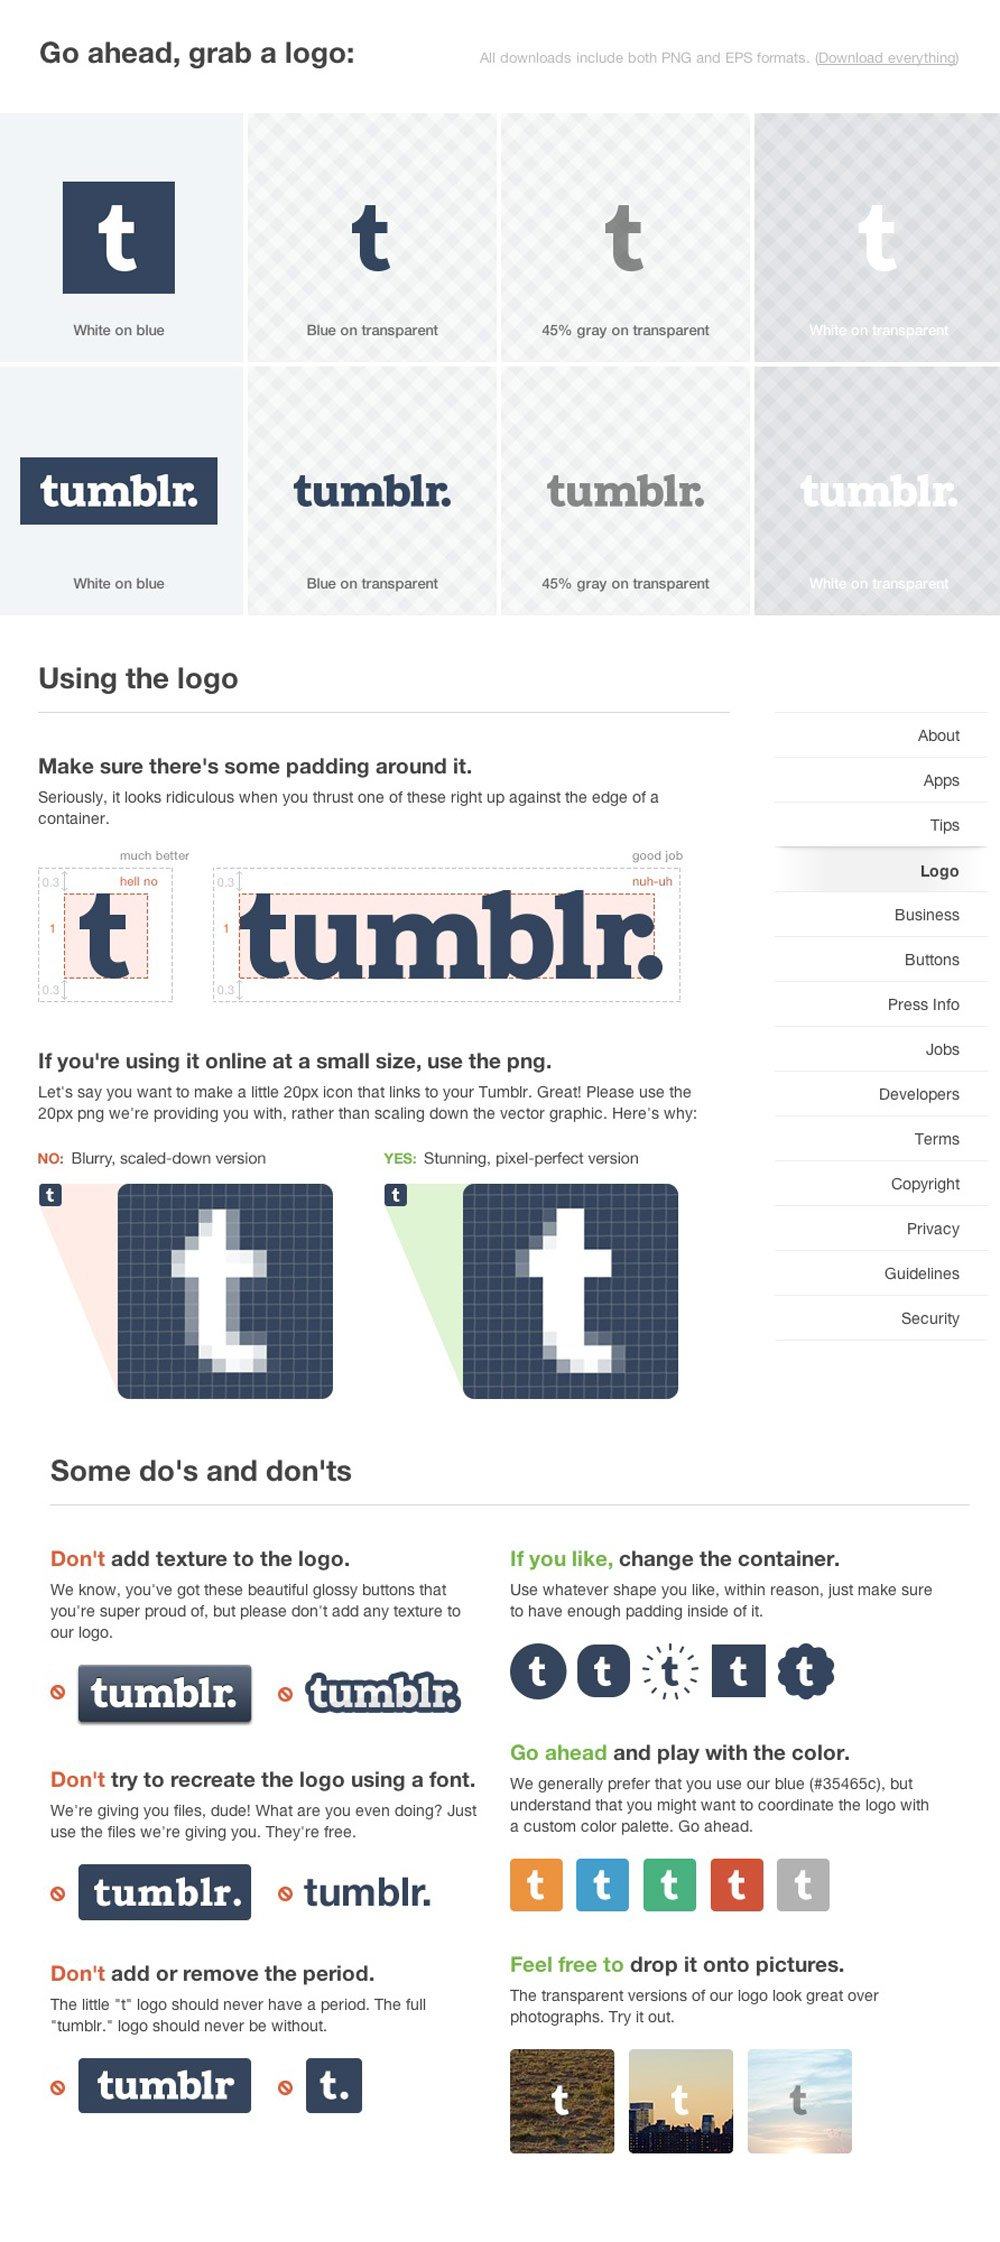 Tumblr T Logo - Tumblr Gets a New Logo What's Different Between